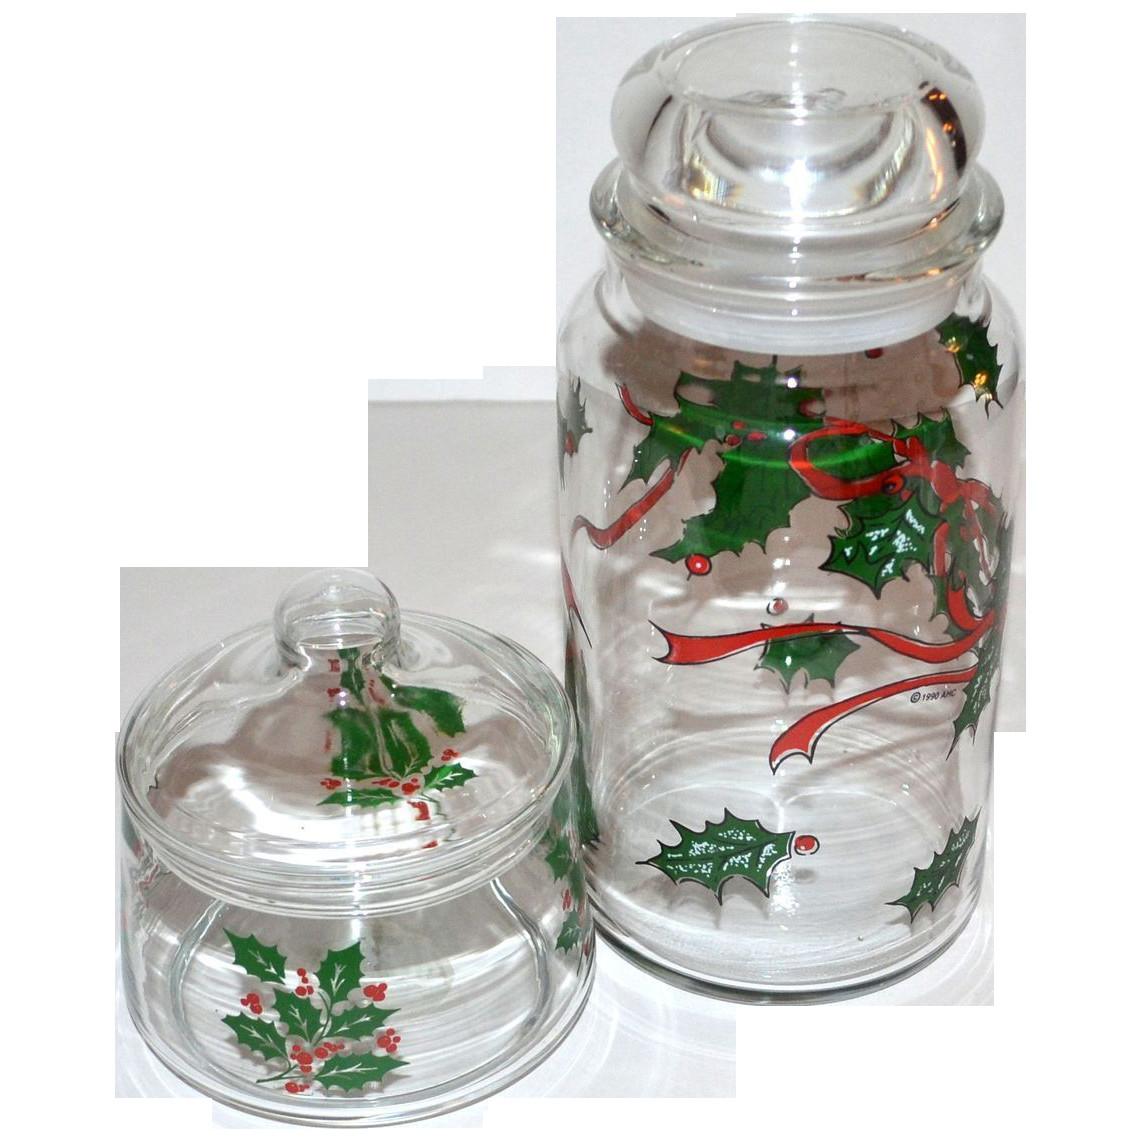 Christmas Glass Candy
 Set of 2 Christmas Holly Glass Candy Jars from